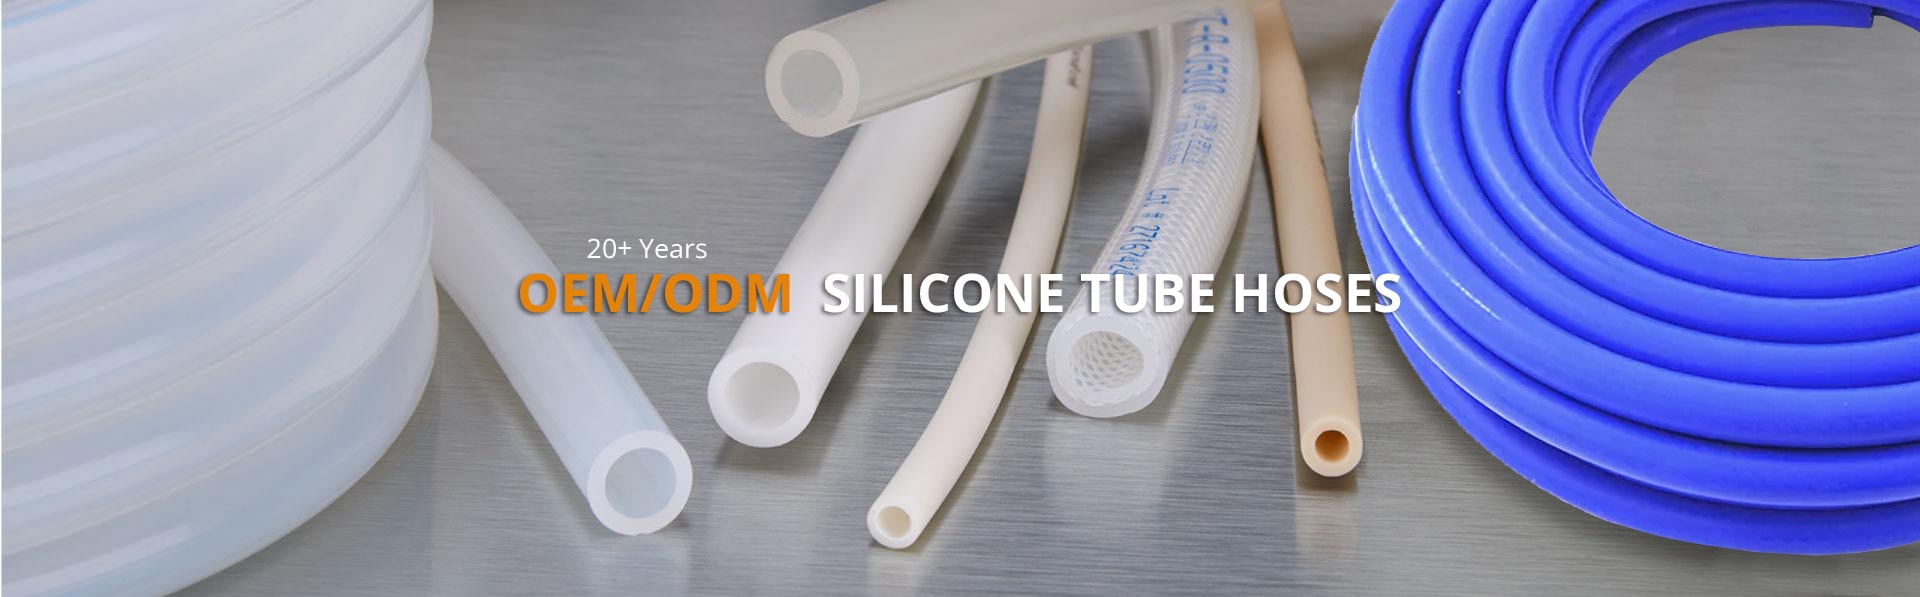 over 20 years oem odm manufacturer of silicone tubing